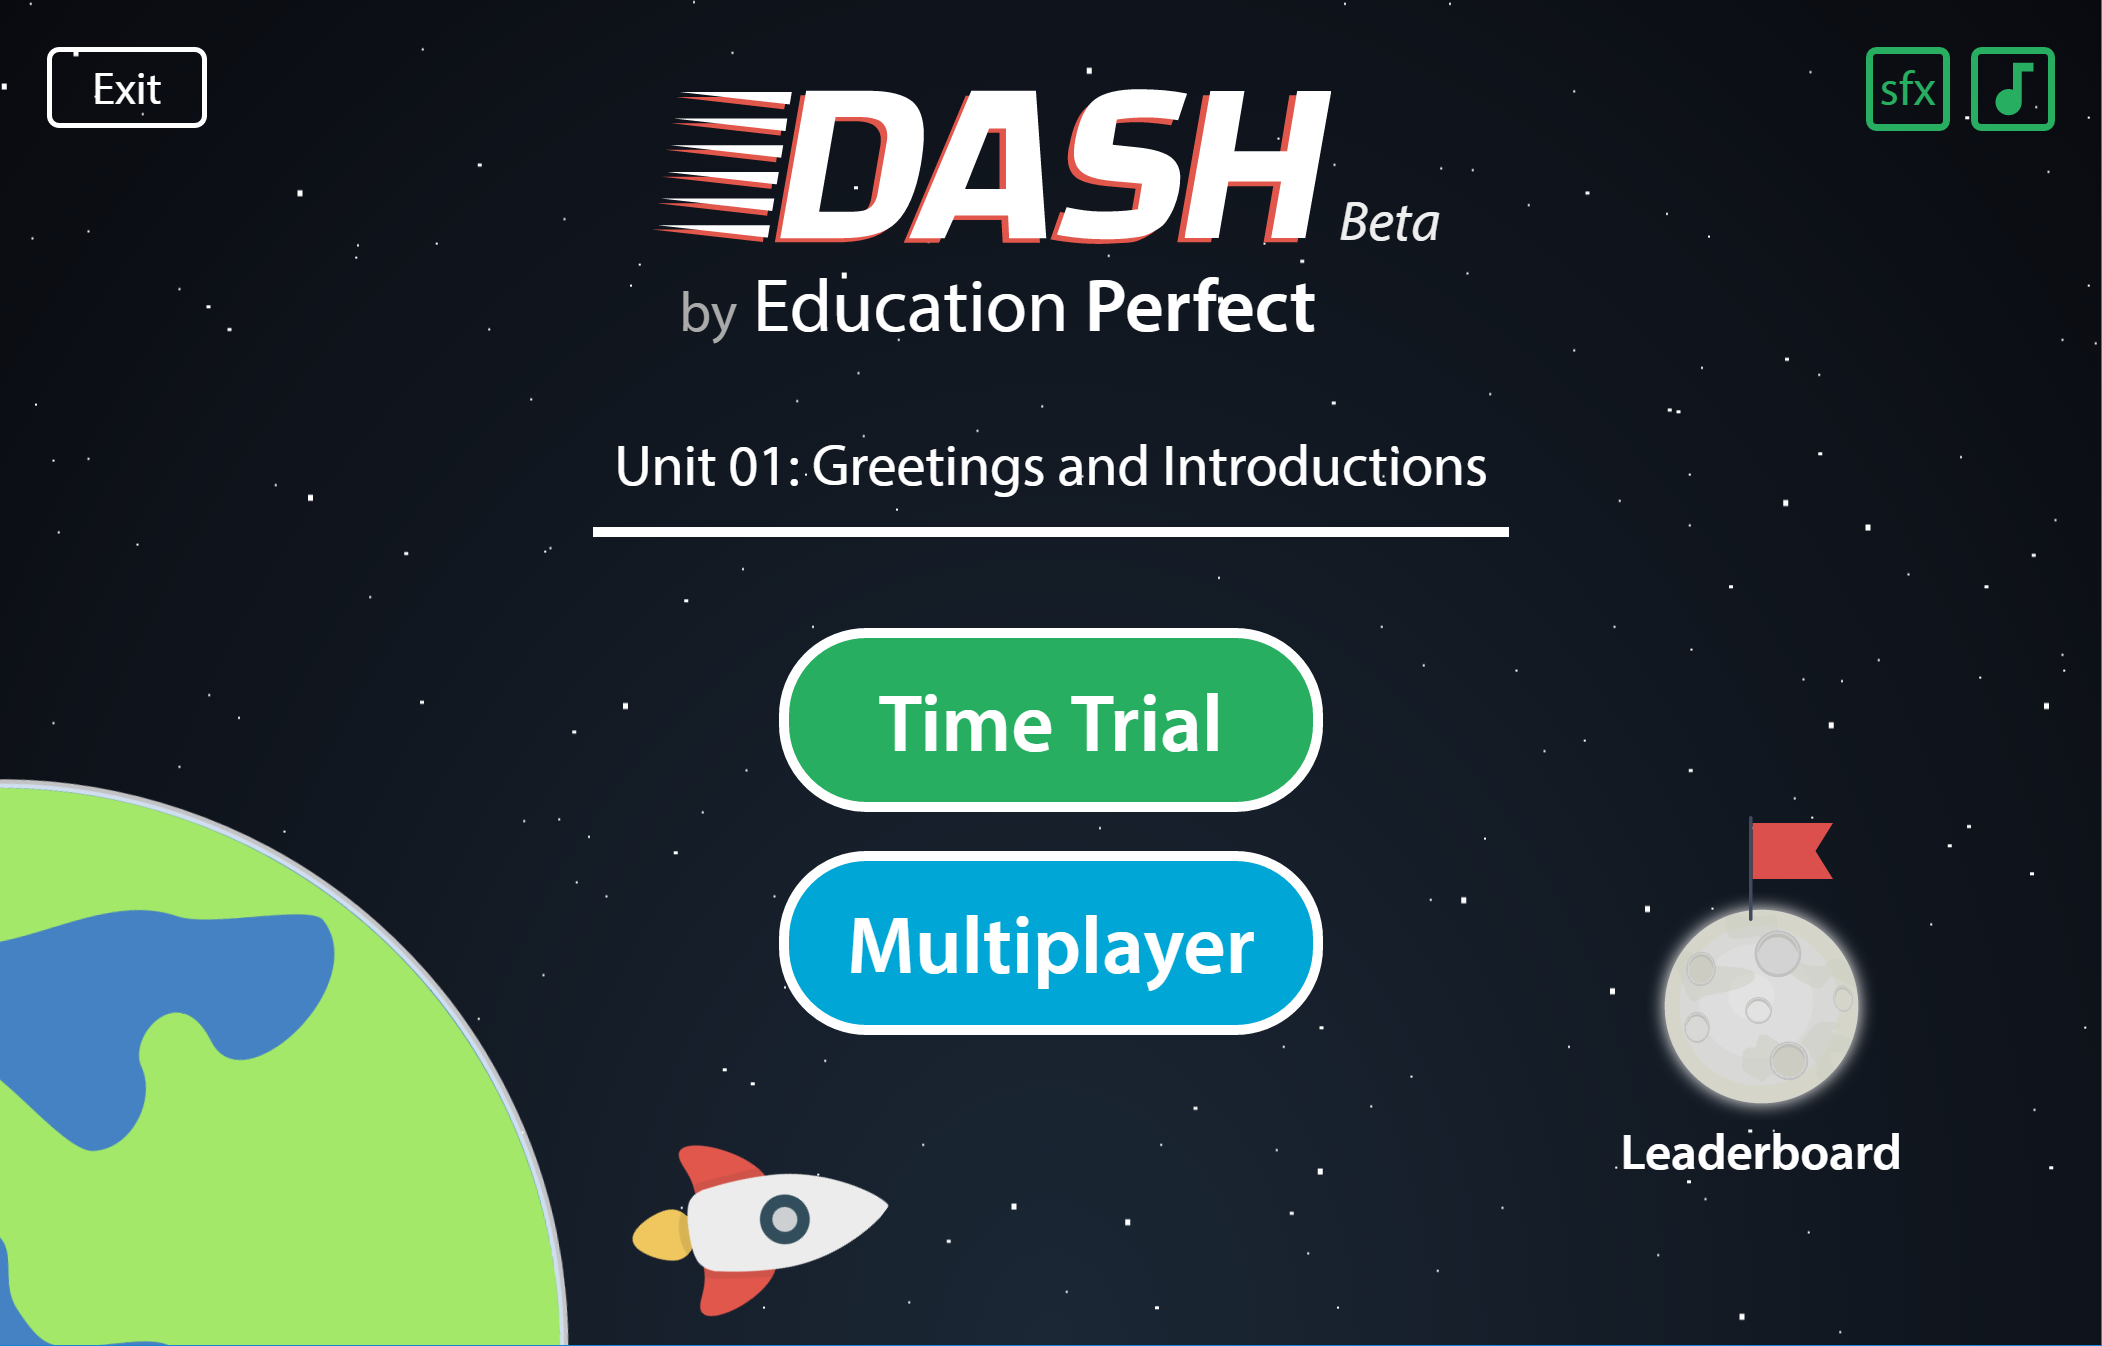 Showing two play styles in Dash: Time Trial and Multiplayer